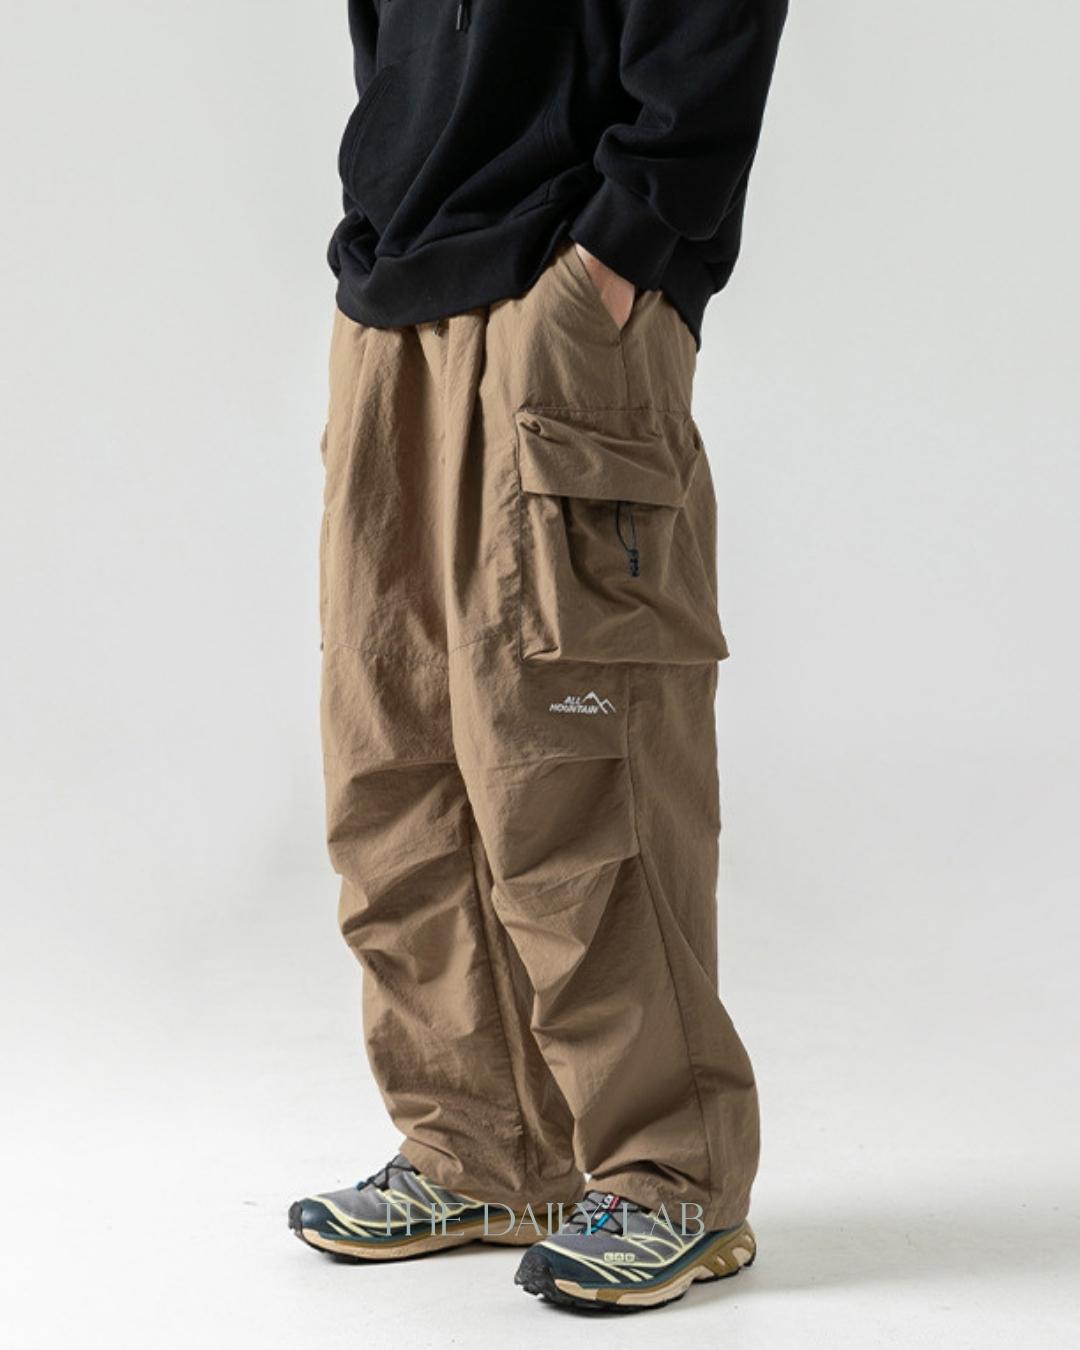 All Mountain Pocketed Cargo Trousers in Khaki – The Daily Lab